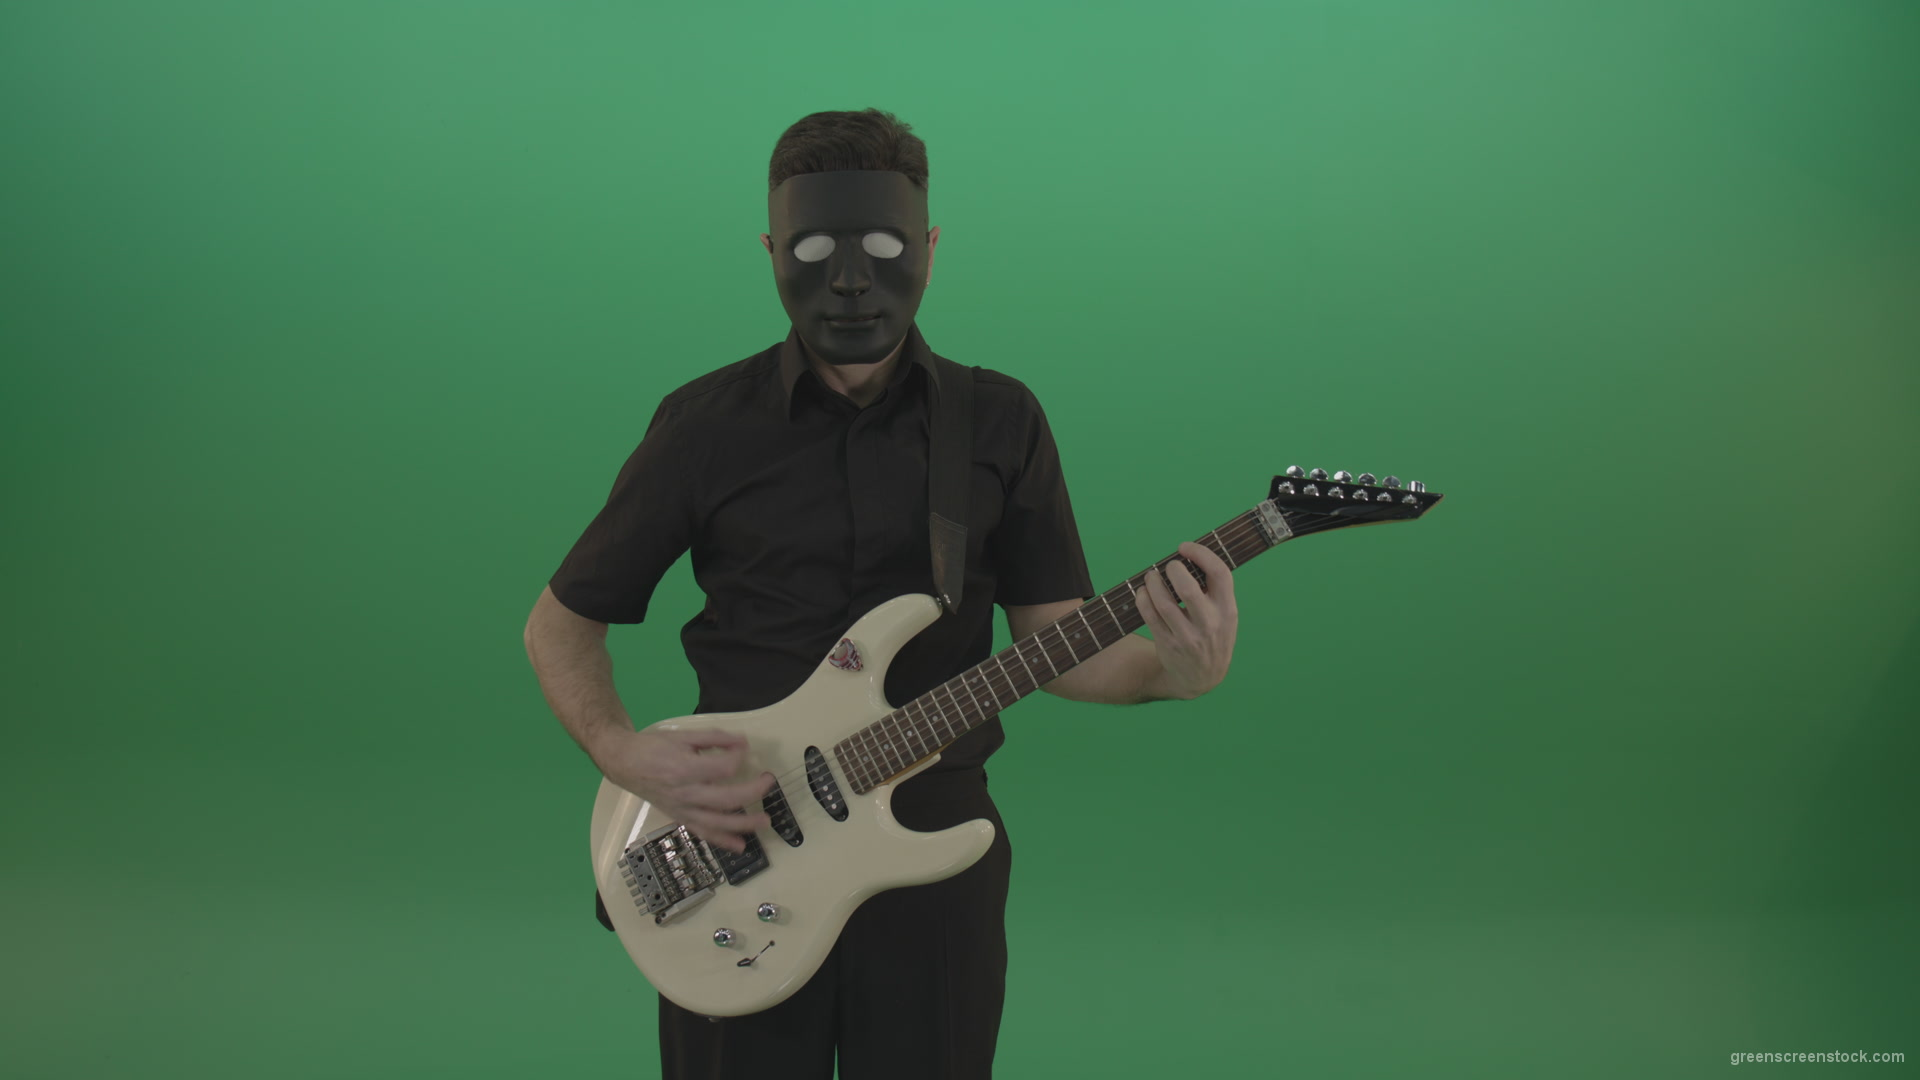 Hard-rock-guitarist-man-playing-white-guitar-in-black-mask-isolated-on-green-background_008 Green Screen Stock